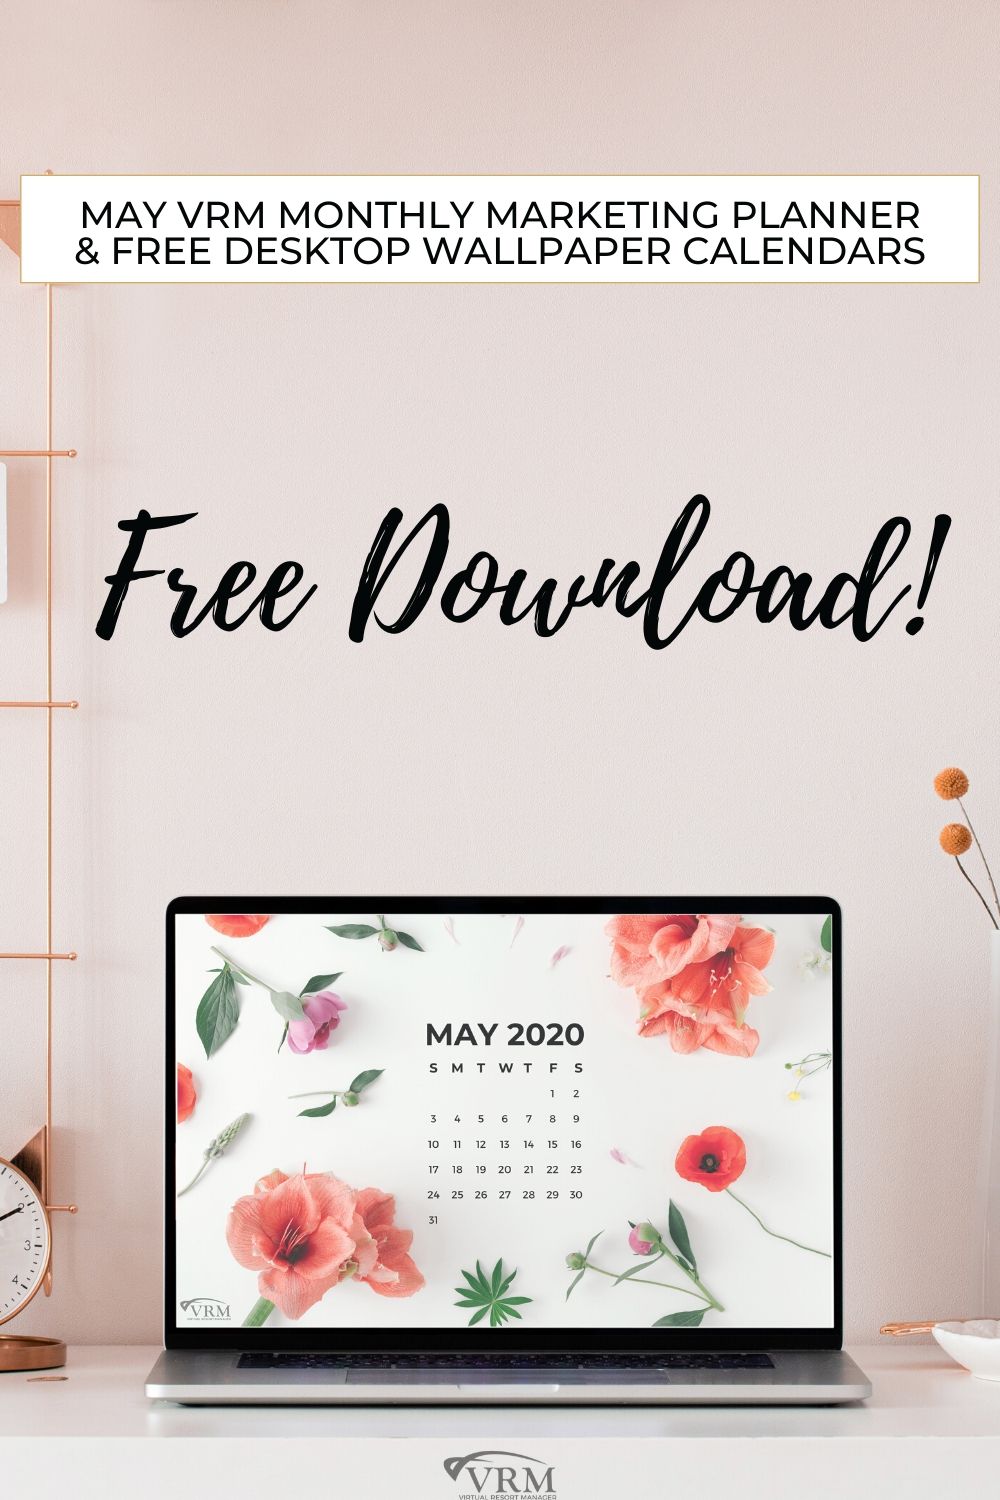 May VRM Monthly Marketing Planner and Free Desktop Wallpaper Calendars